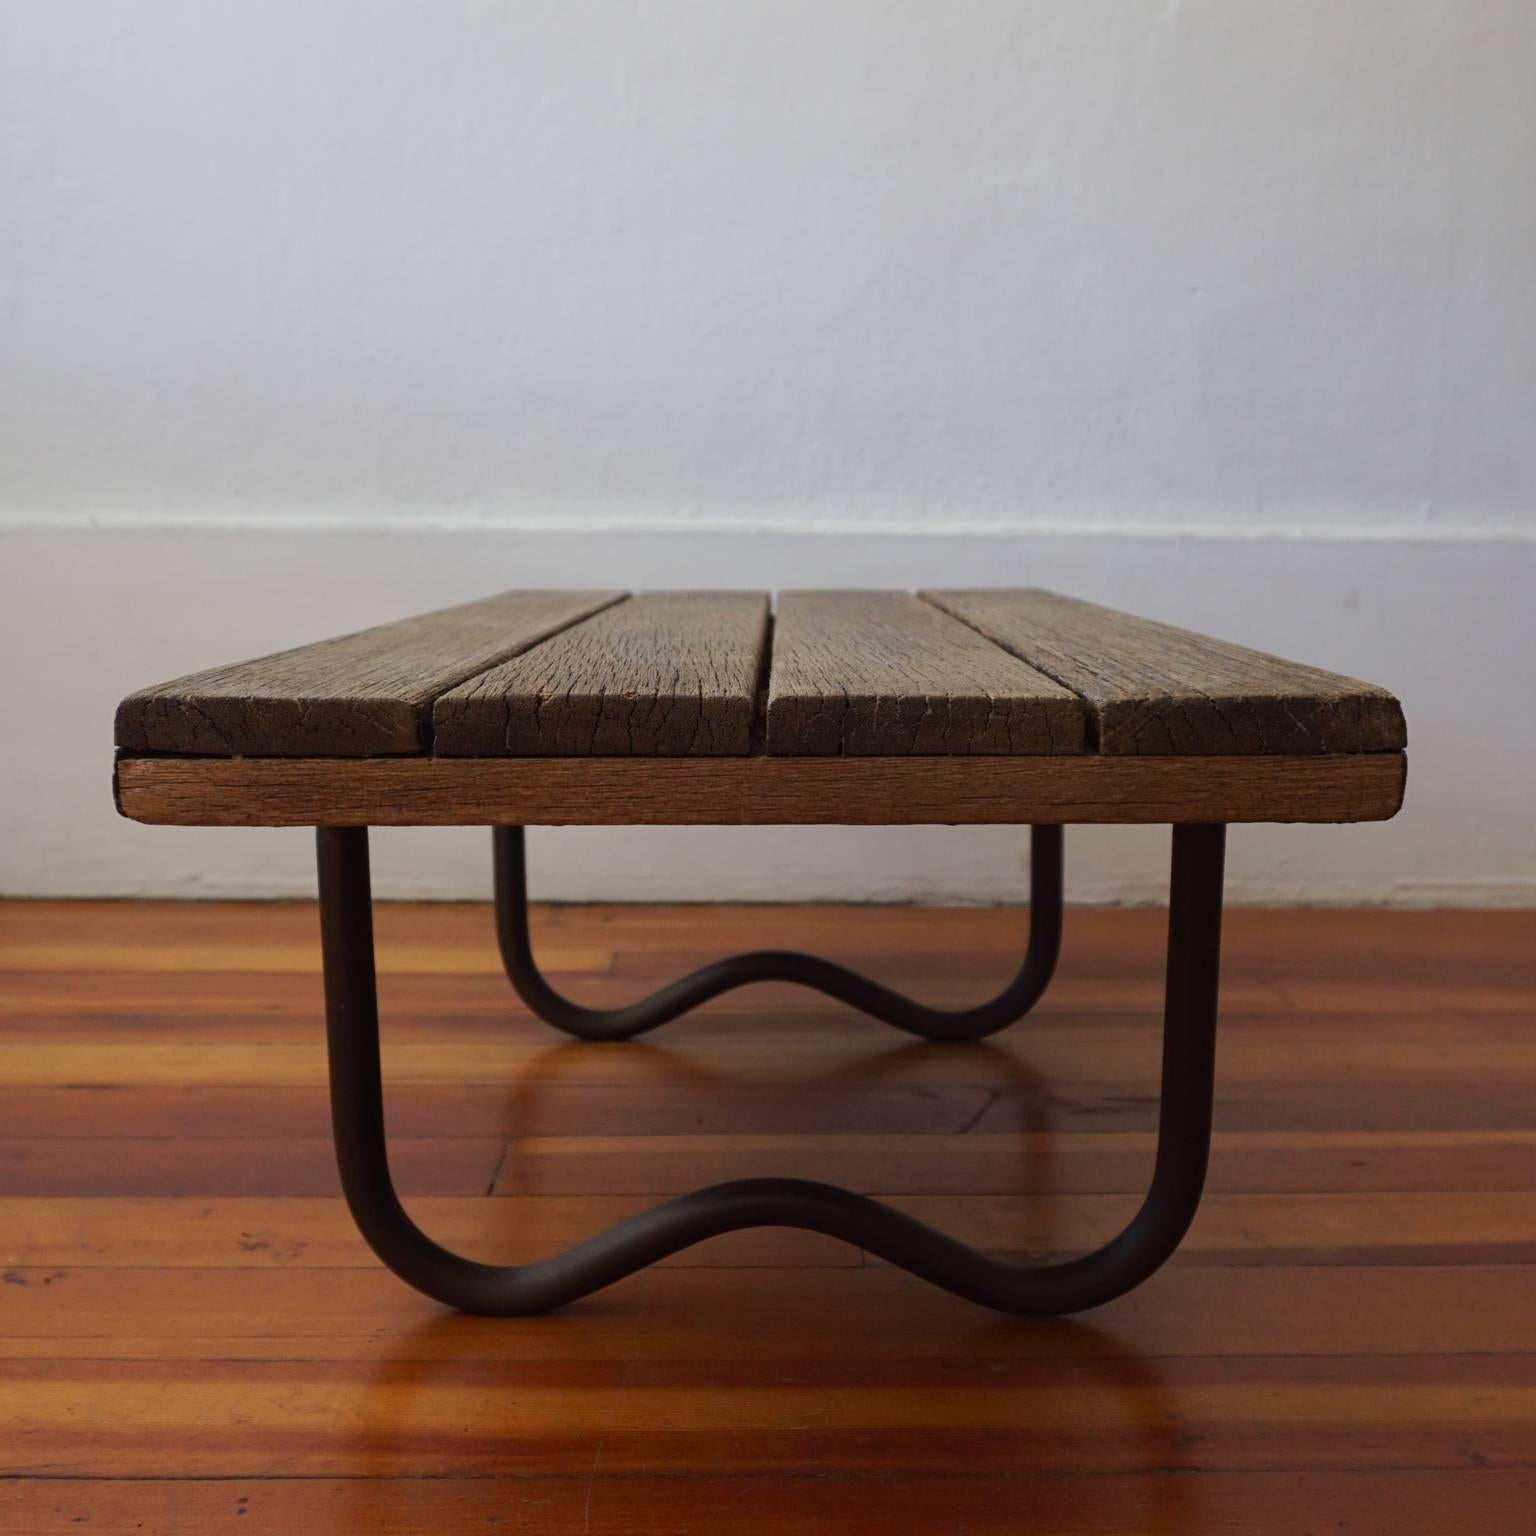 Low and early Walter lamb side table. Hard to find. Original wood top. Bronze tubular top.